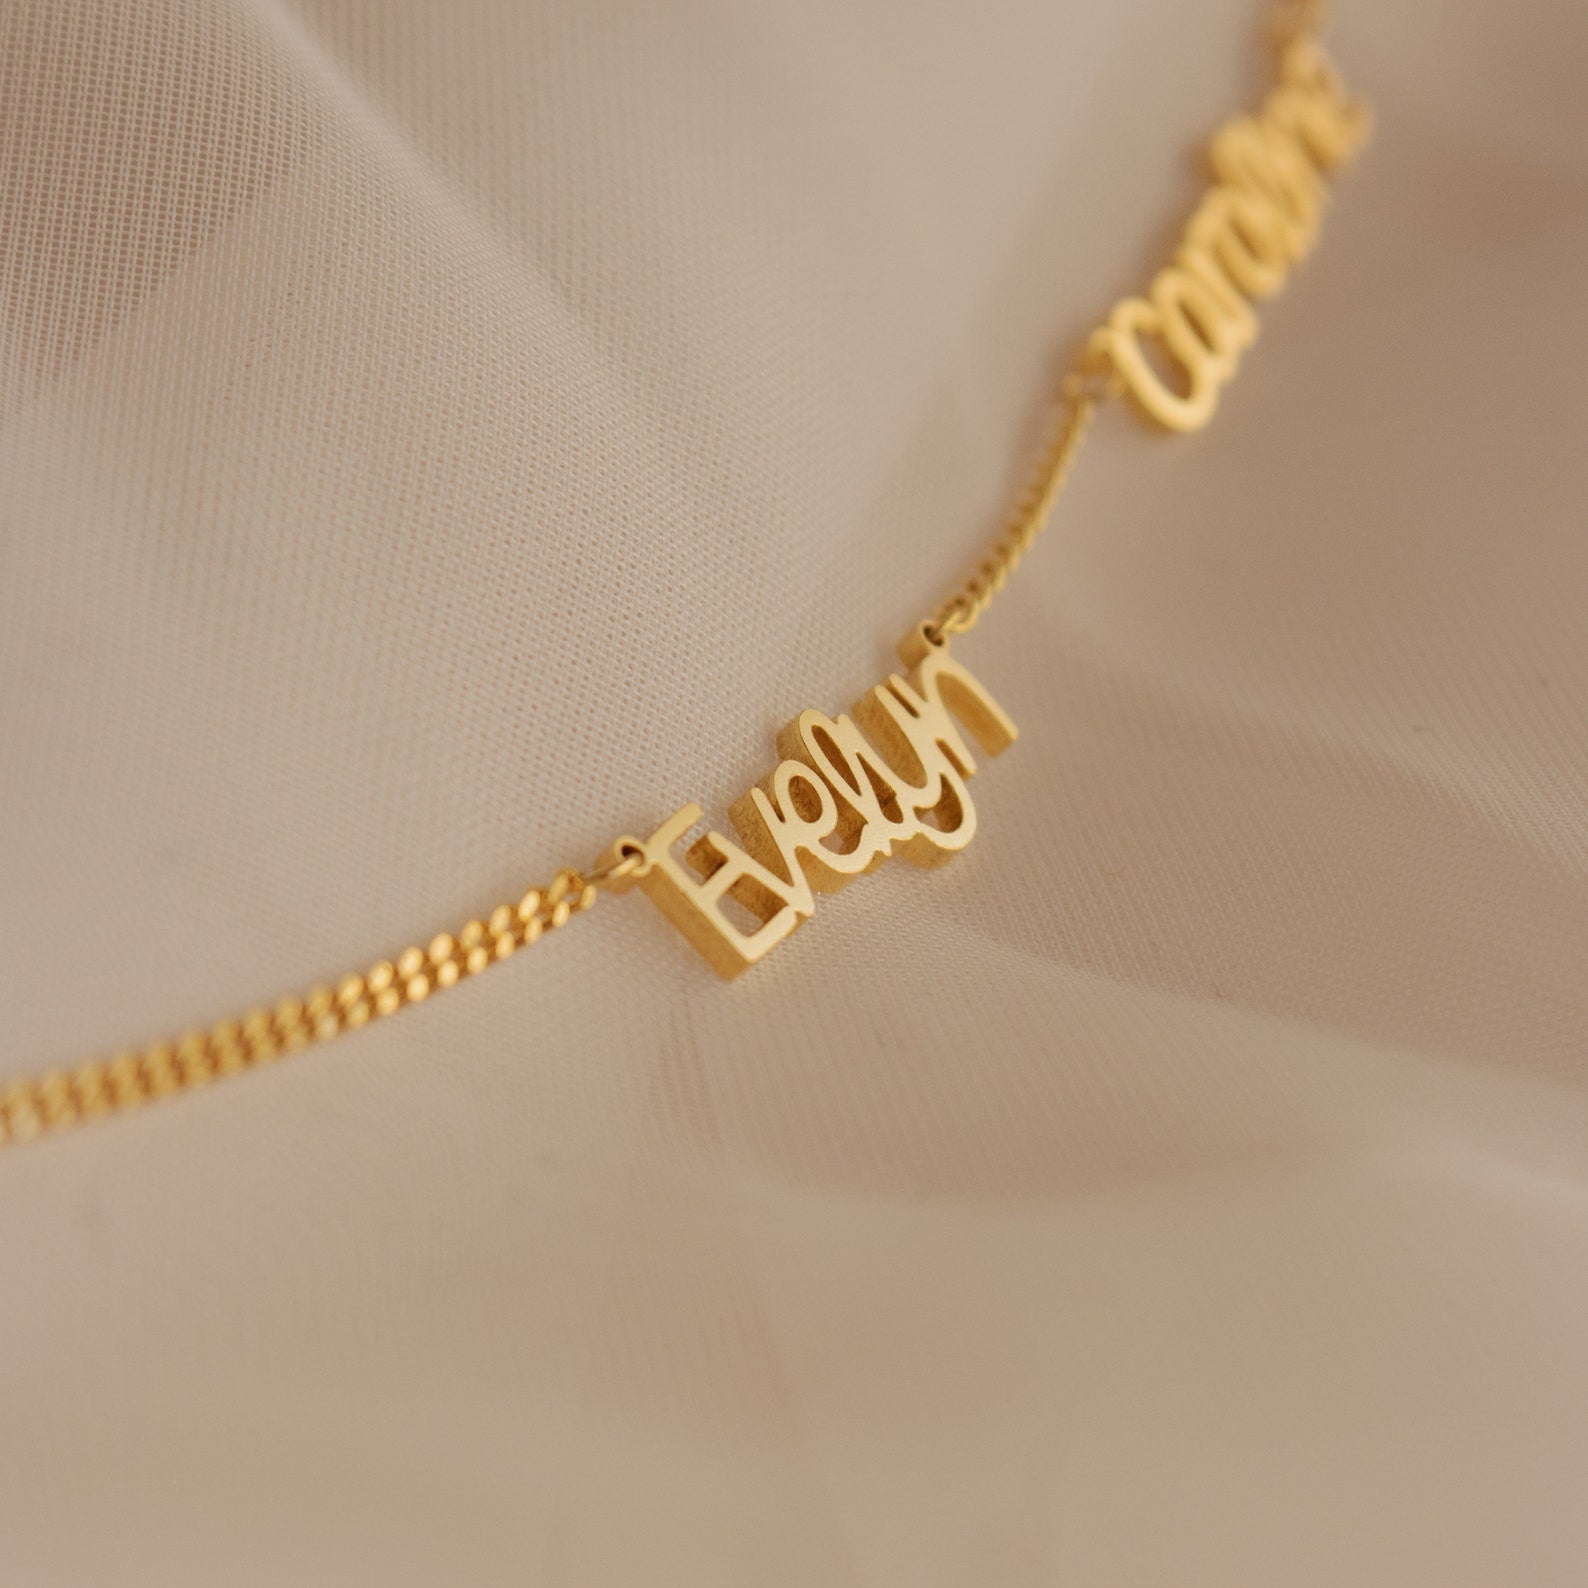 Preppy Multiple Name Necklace in Curb Chain